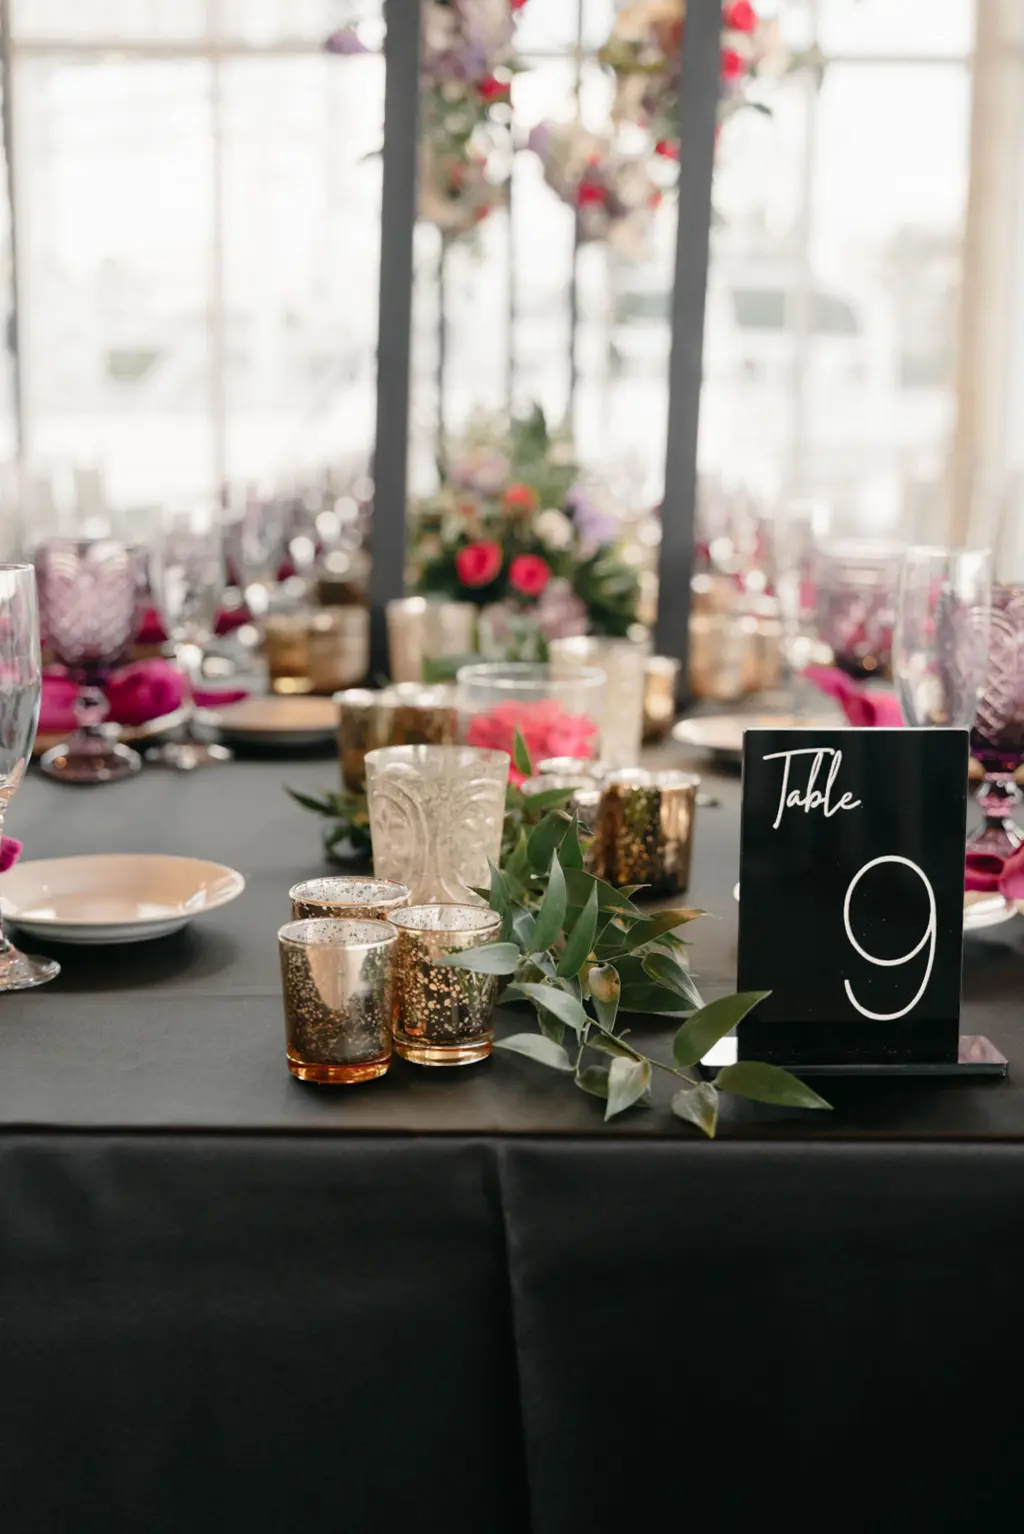 Modern Black and White Table Number Sign Ideas with Gold Mercury Glass Votive Centerpiece Inspiration | Whimsical Black and Pink Wedding Reception Decor